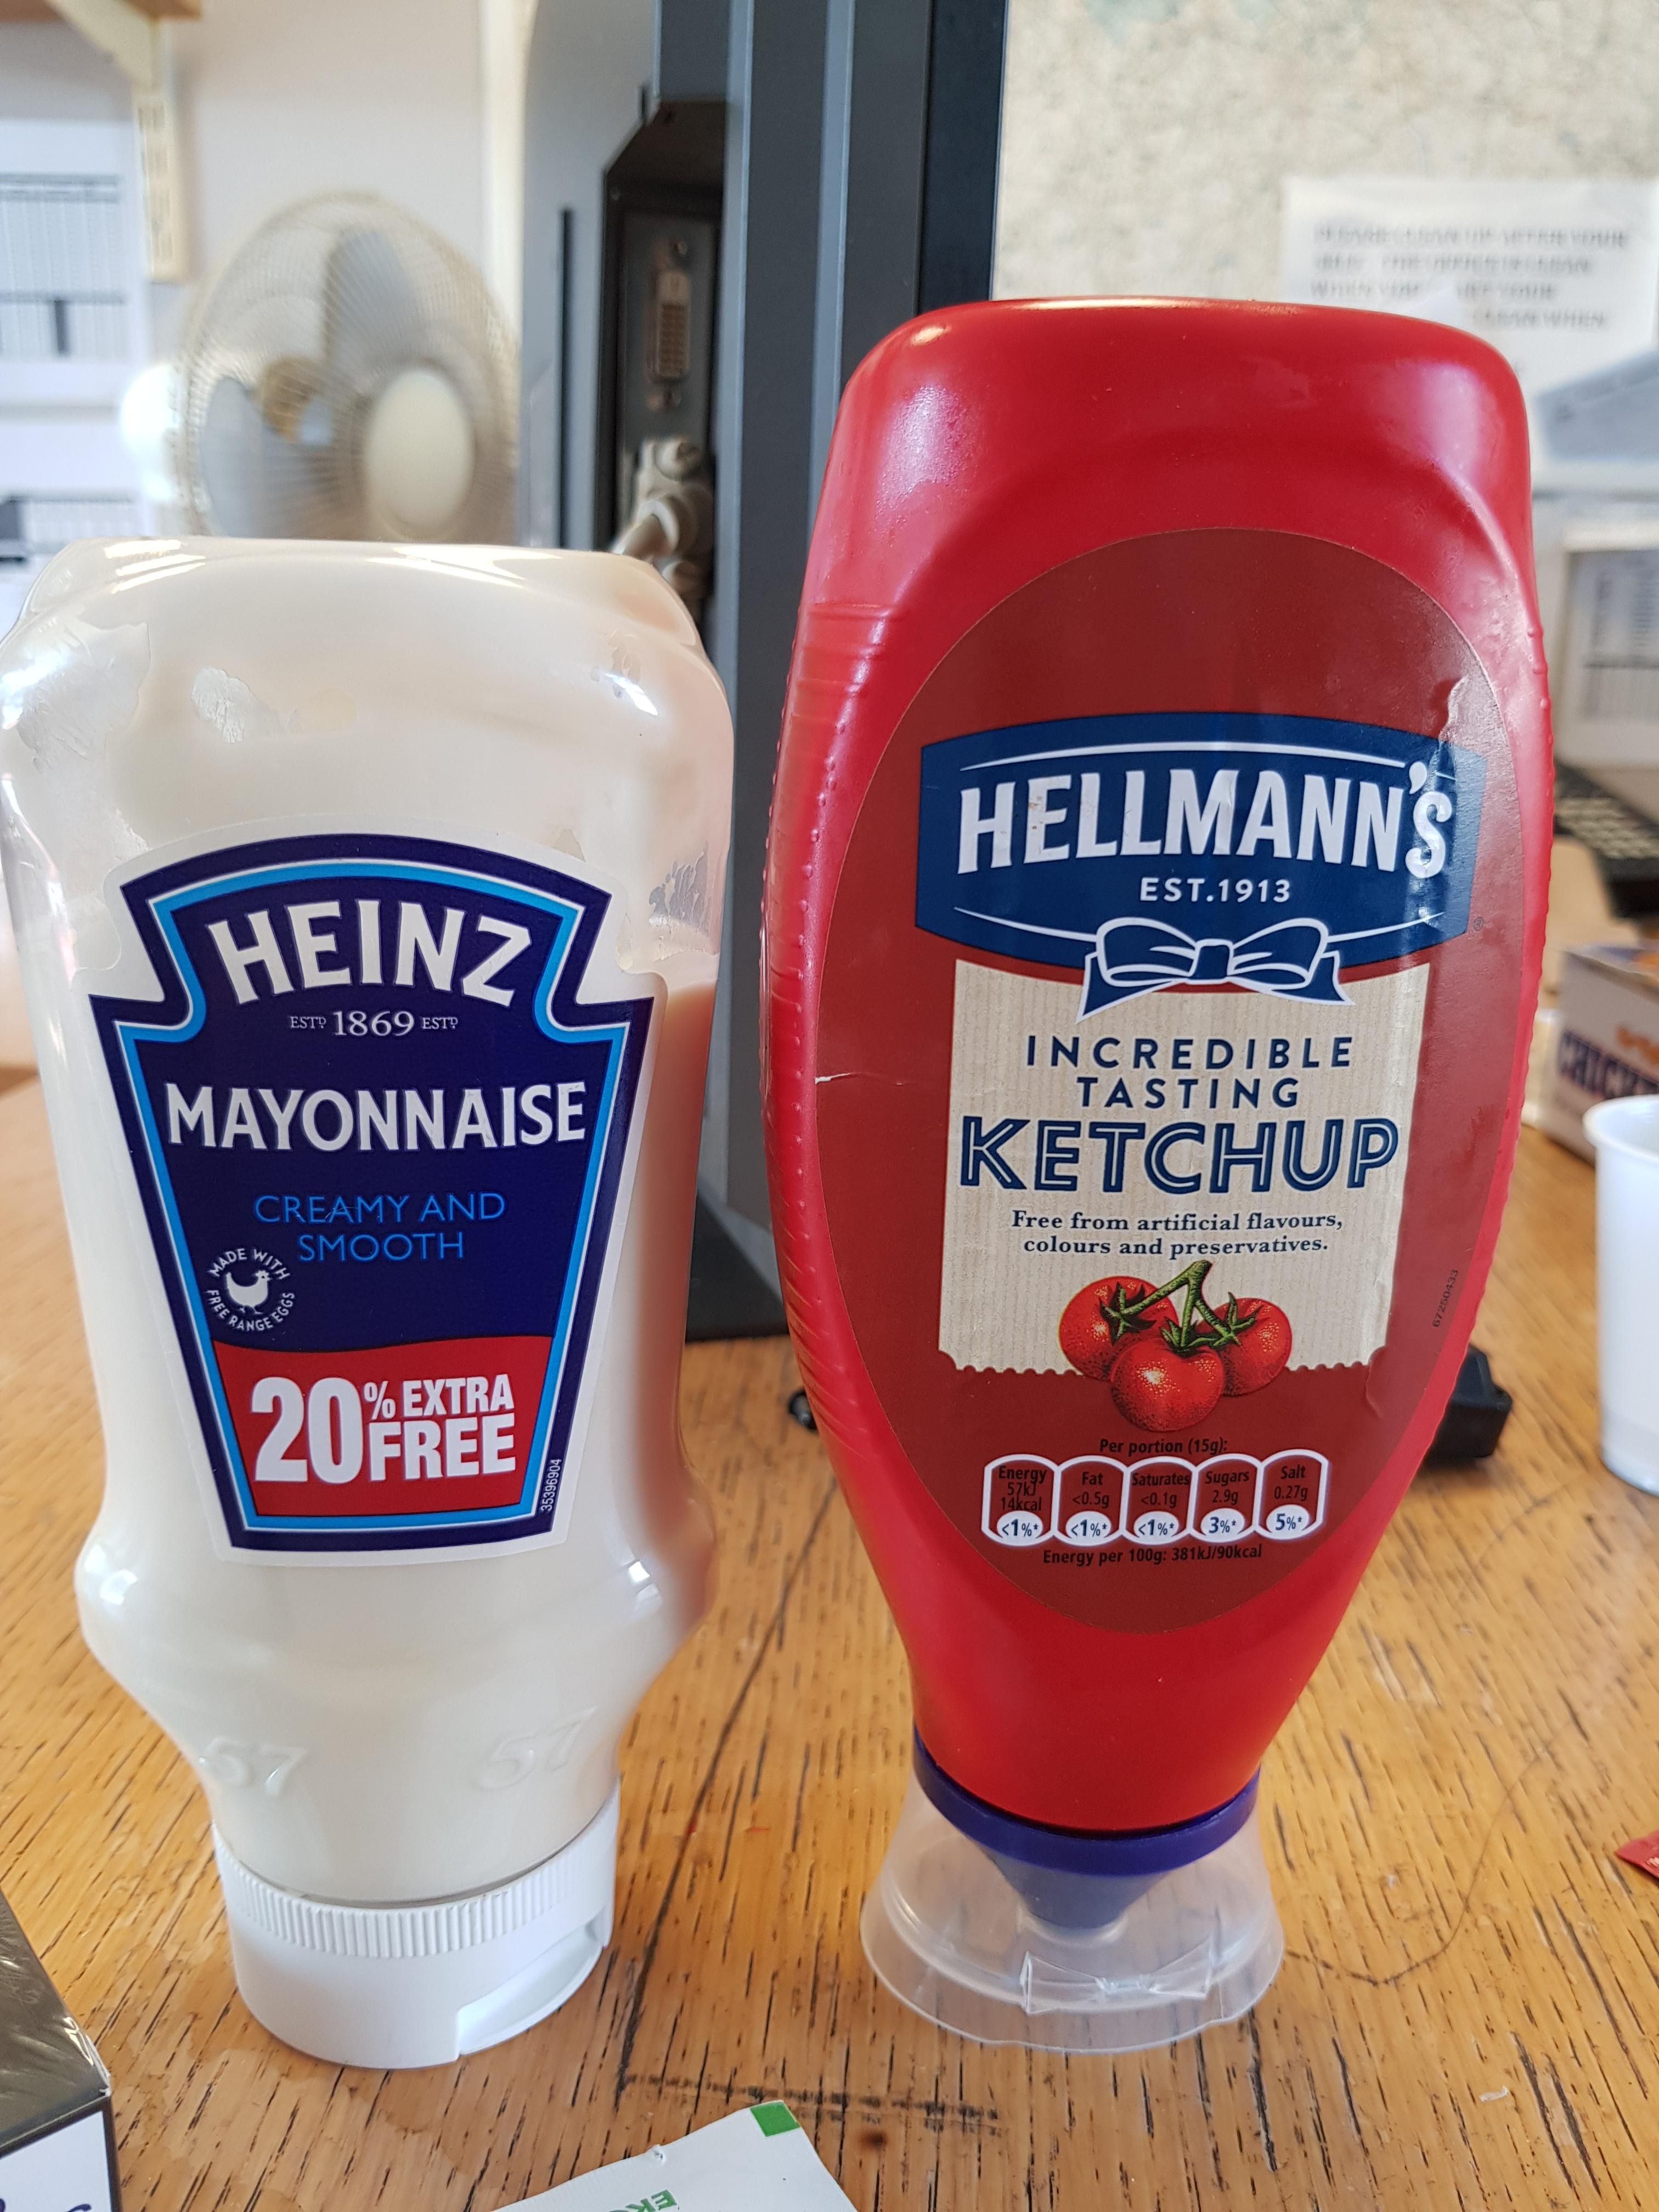 When you insist on Heinz and Hellmans but something still isn't right